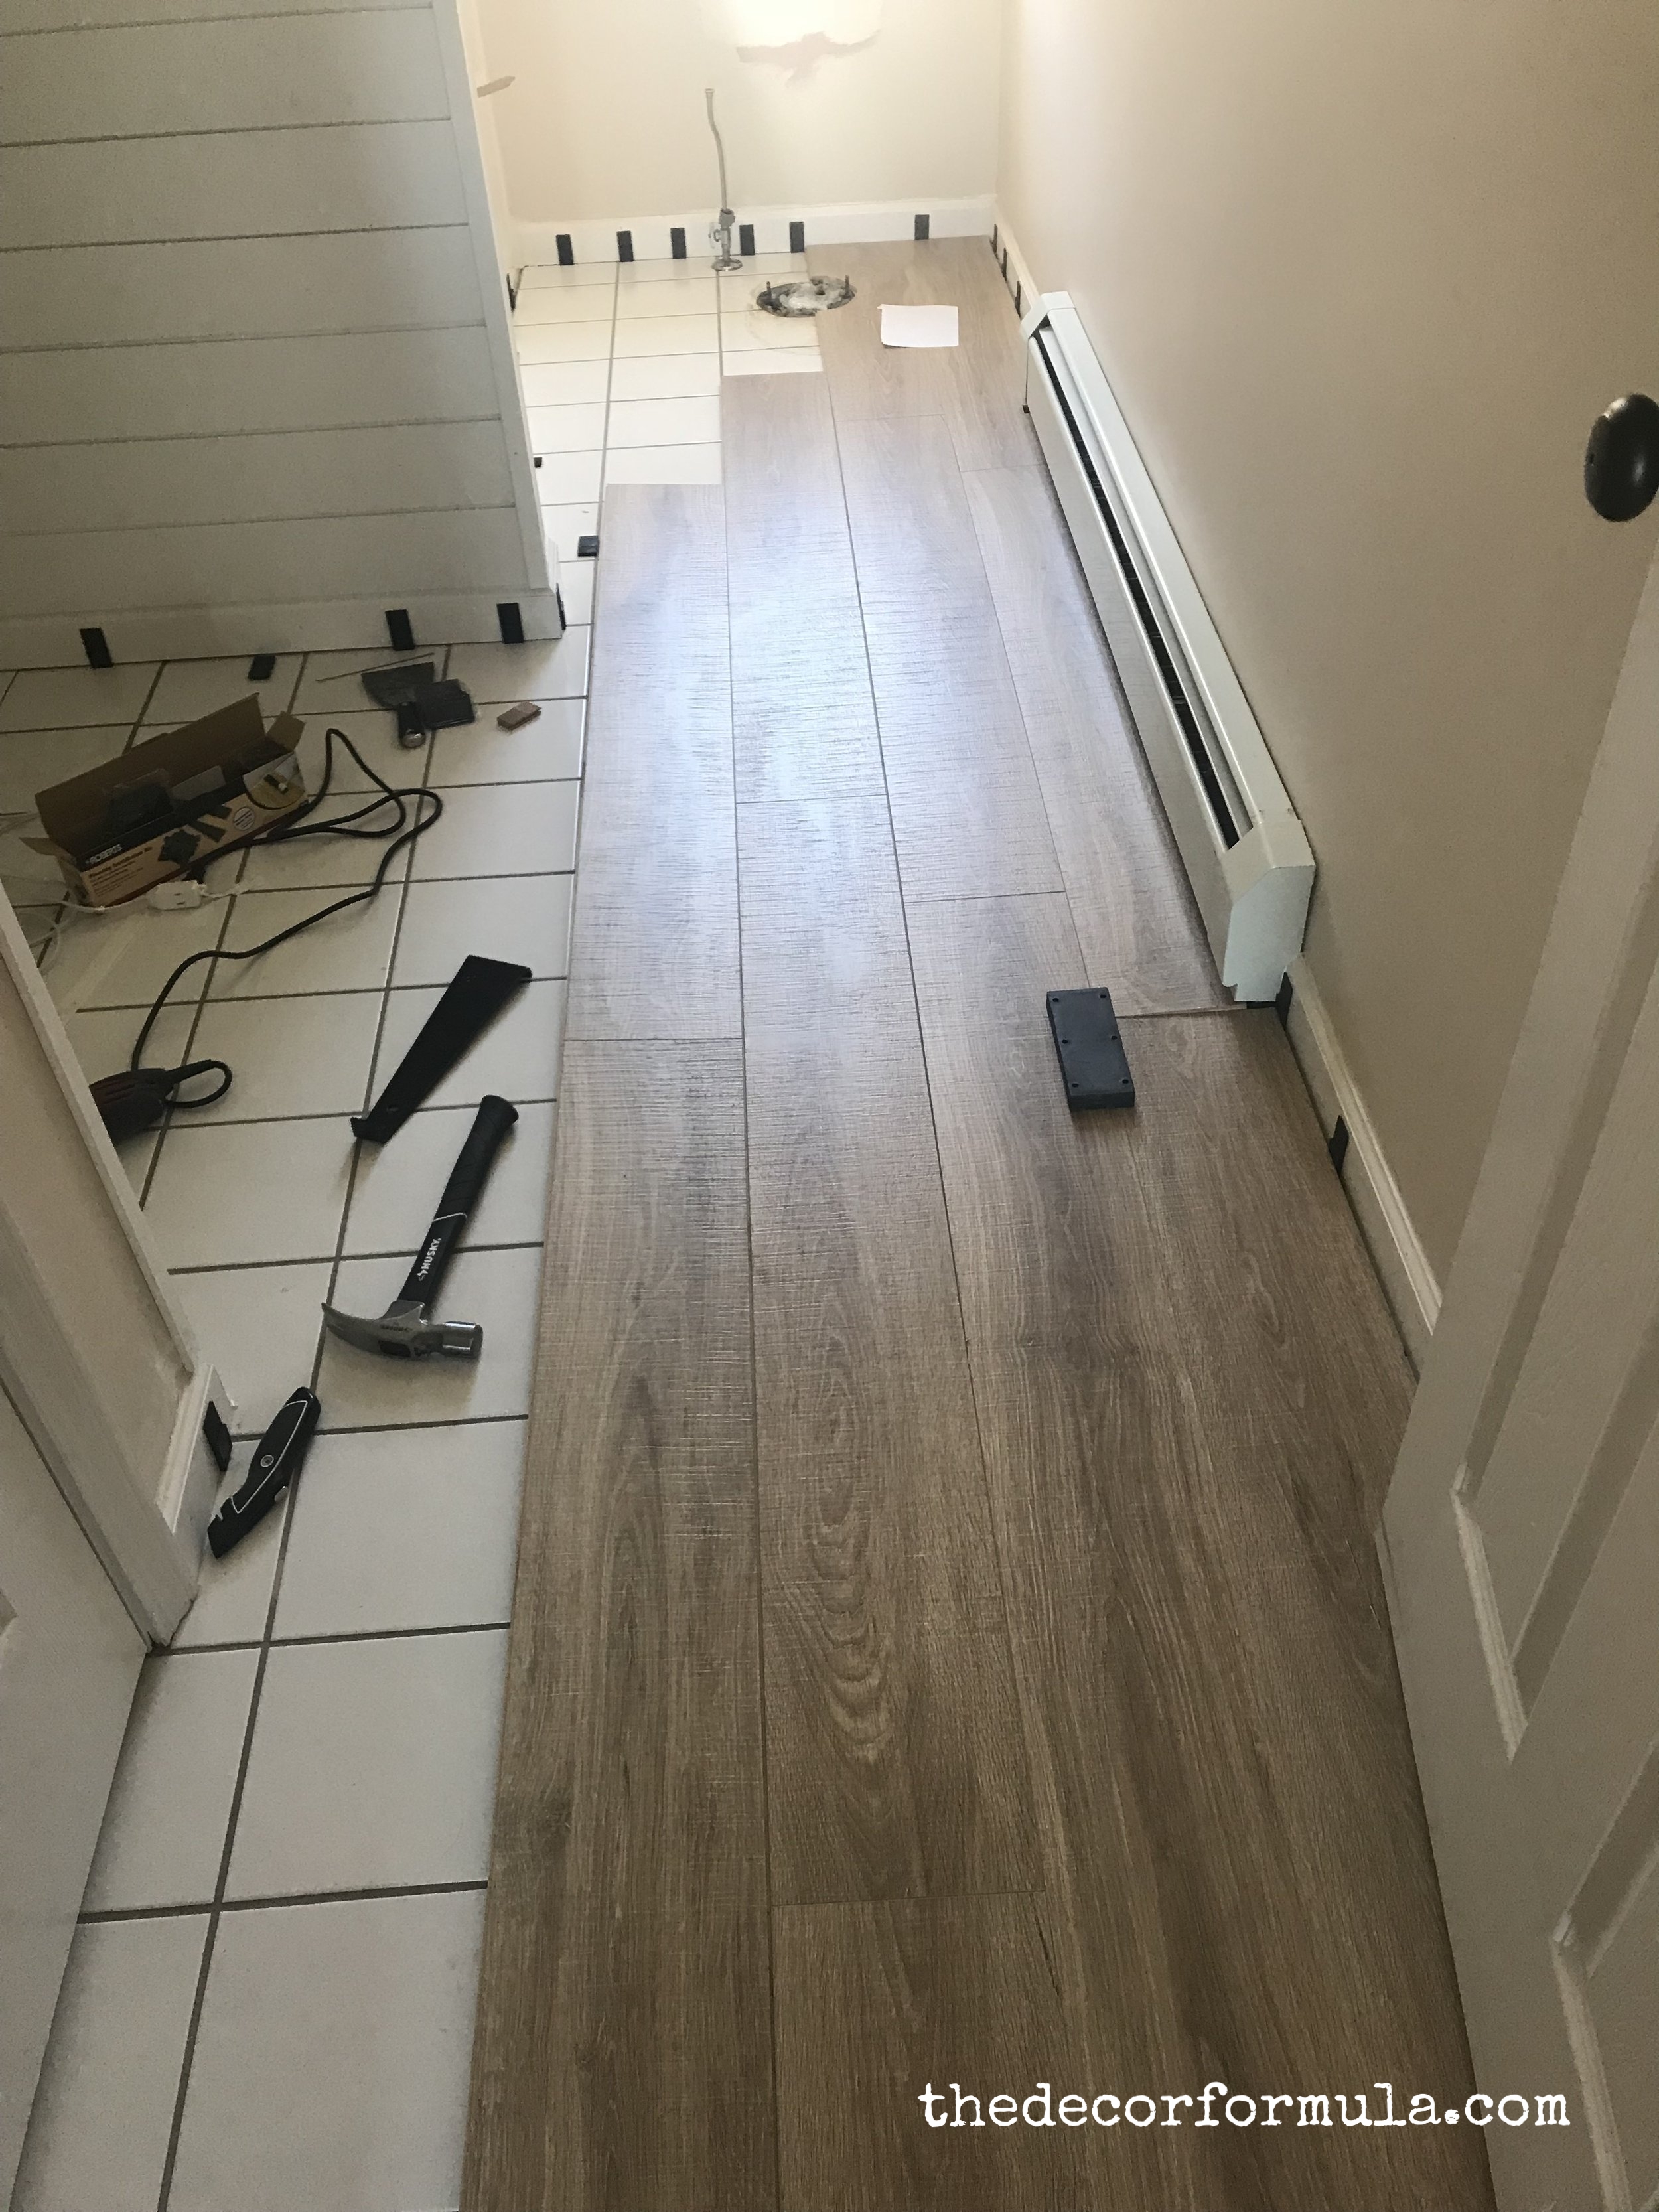 Ideas For Covering Up Tile Floors, Can You Put Hardwood Floors Over Tile